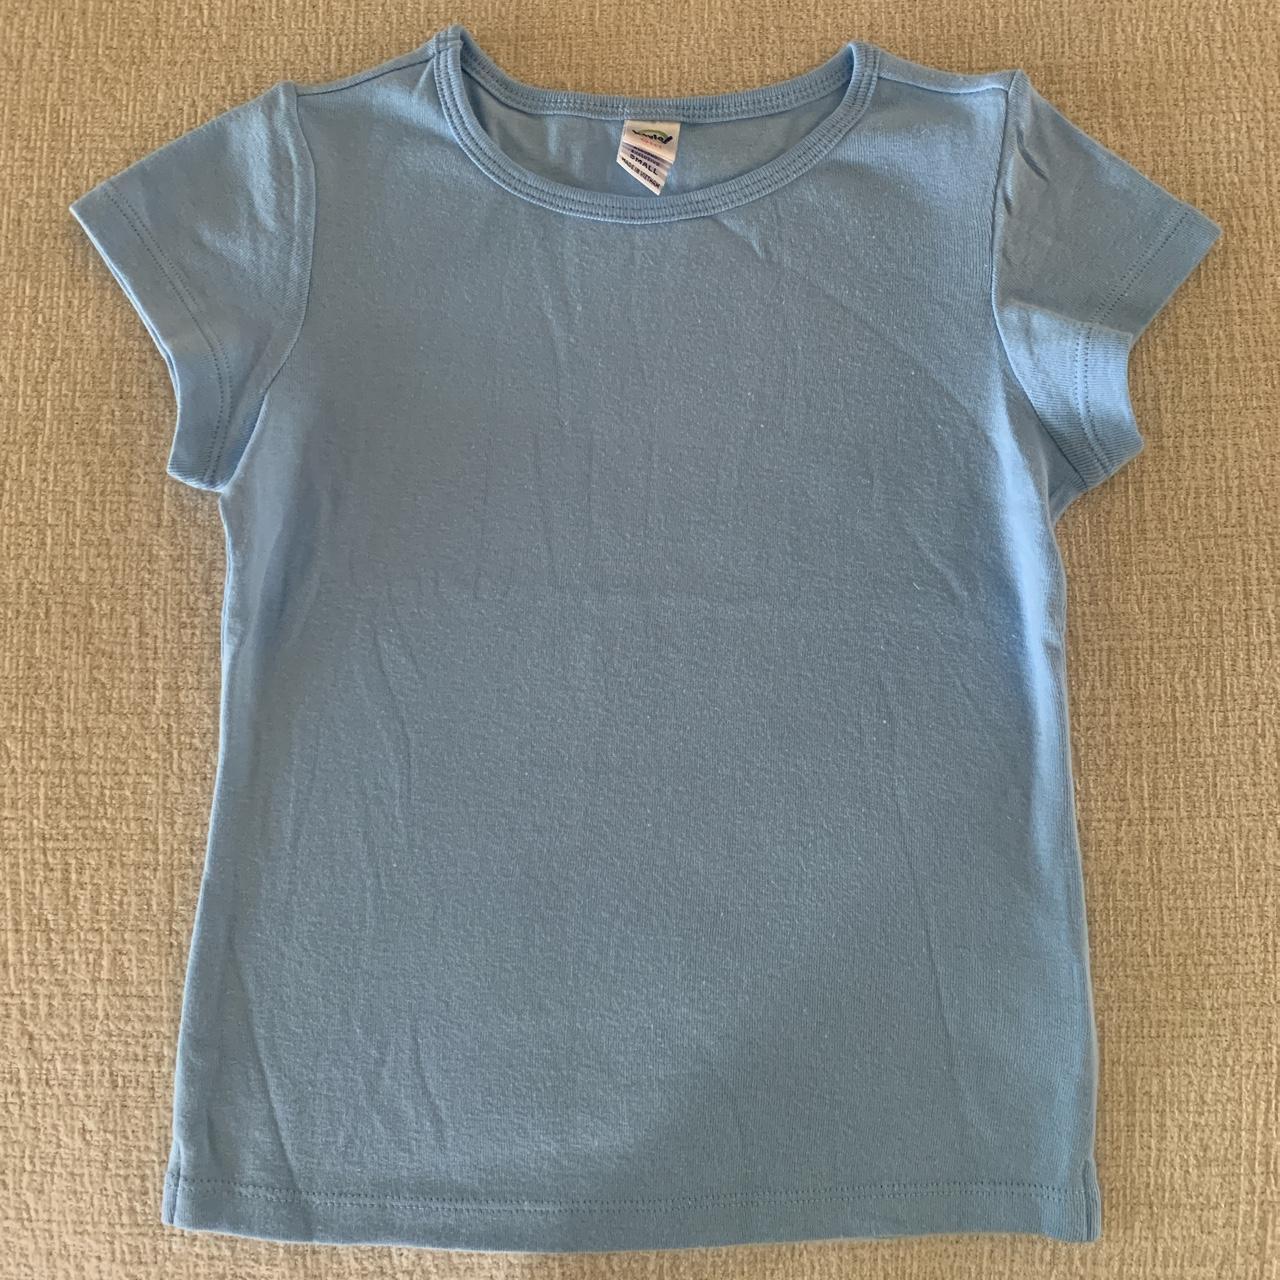 Lily Rose Depp inspired baby tee🫶🏽 Baby blue color,... - Depop